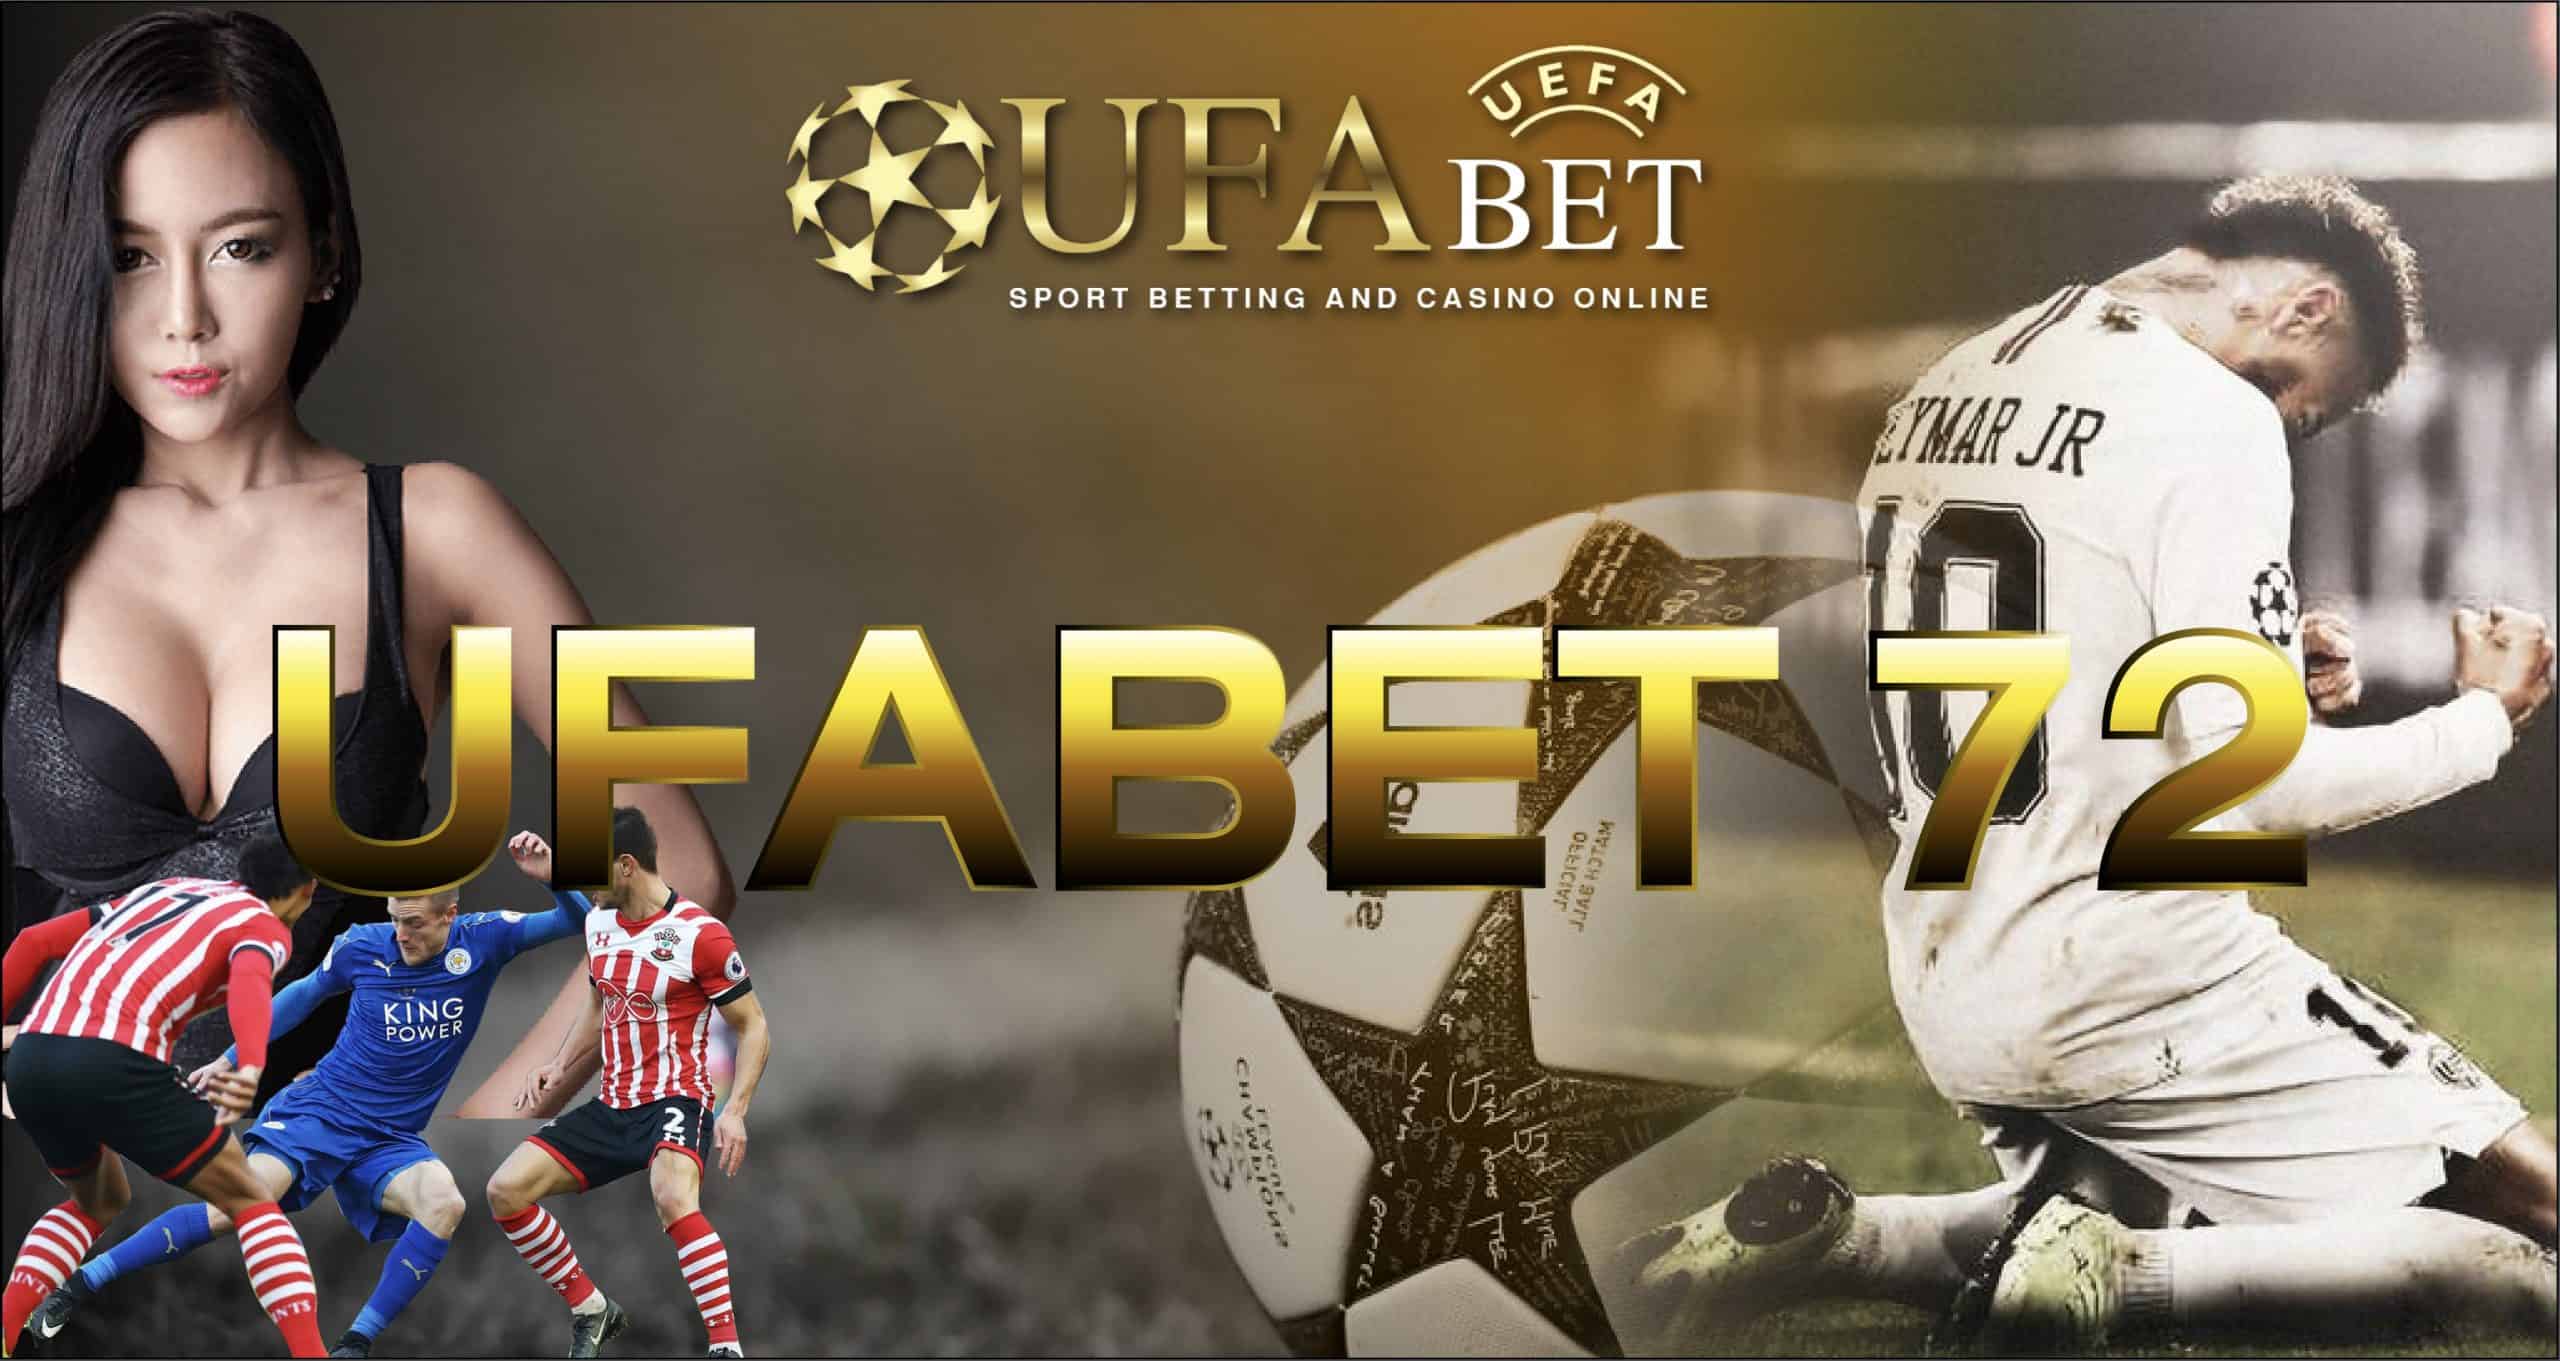 With no worry just register on ufahero rather than ufabet and start